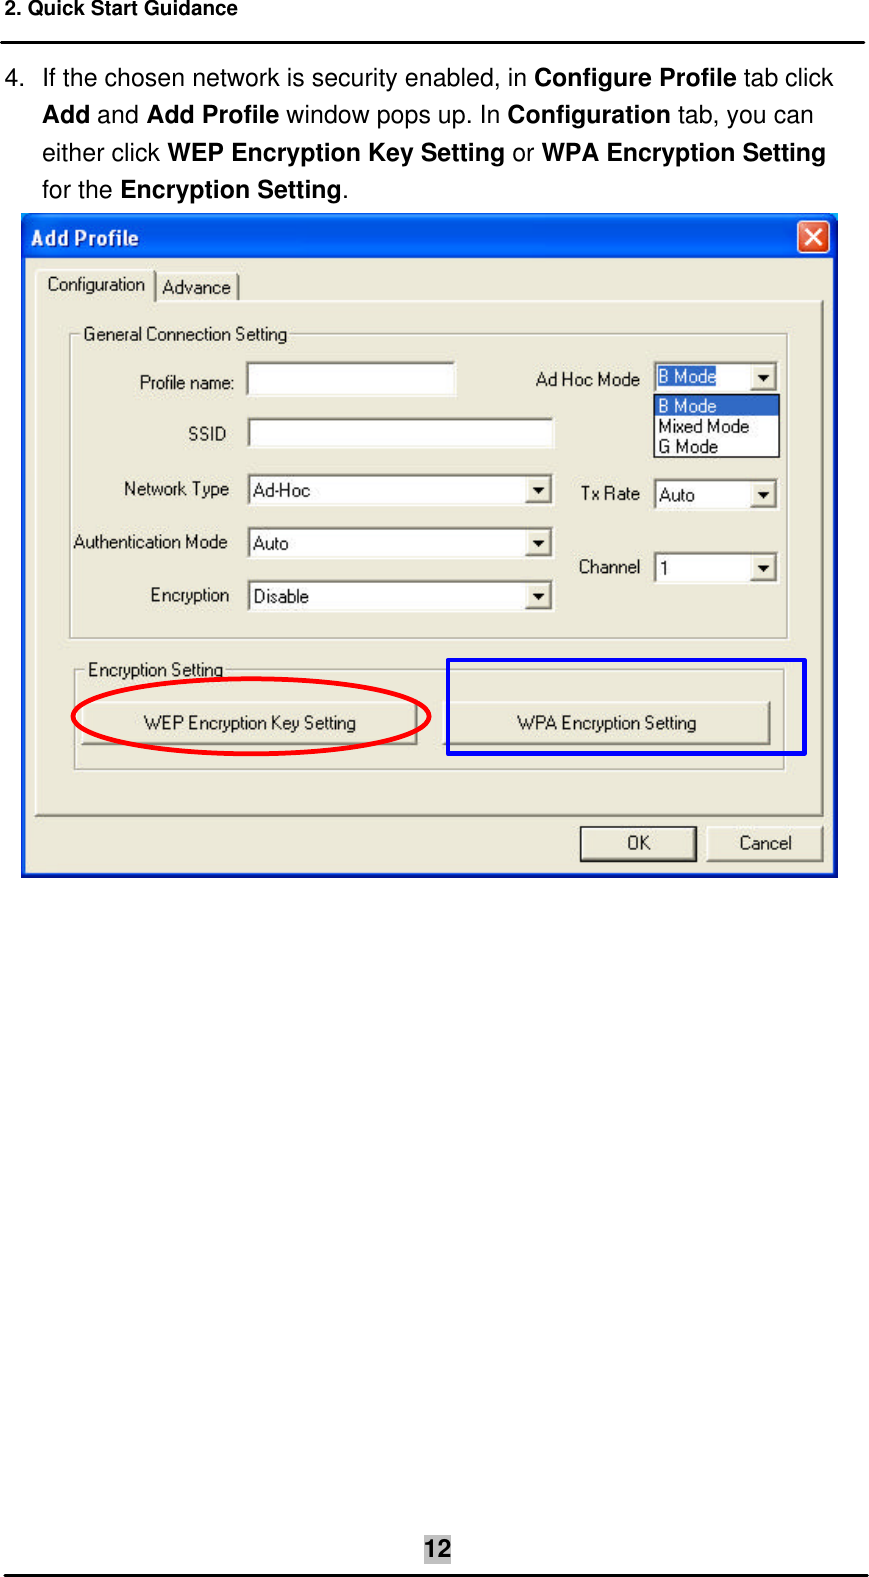 2. Quick Start Guidance    124. If the chosen network is security enabled, in Configure Profile tab click Add and Add Profile window pops up. In Configuration tab, you can either click WEP Encryption Key Setting or WPA Encryption Setting for the Encryption Setting.   